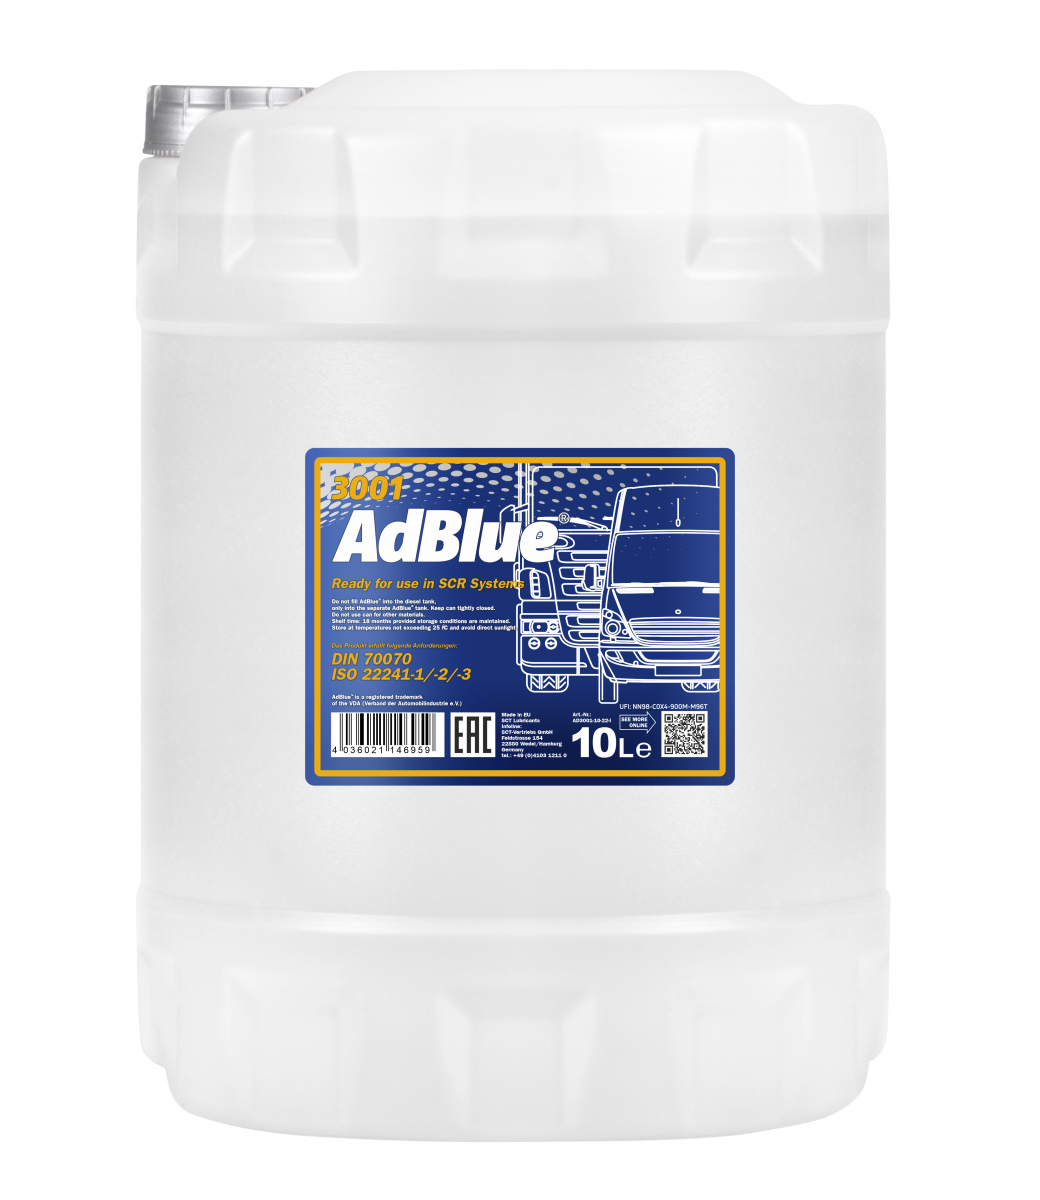 AdBlue and trucks: what it is and what it is used for